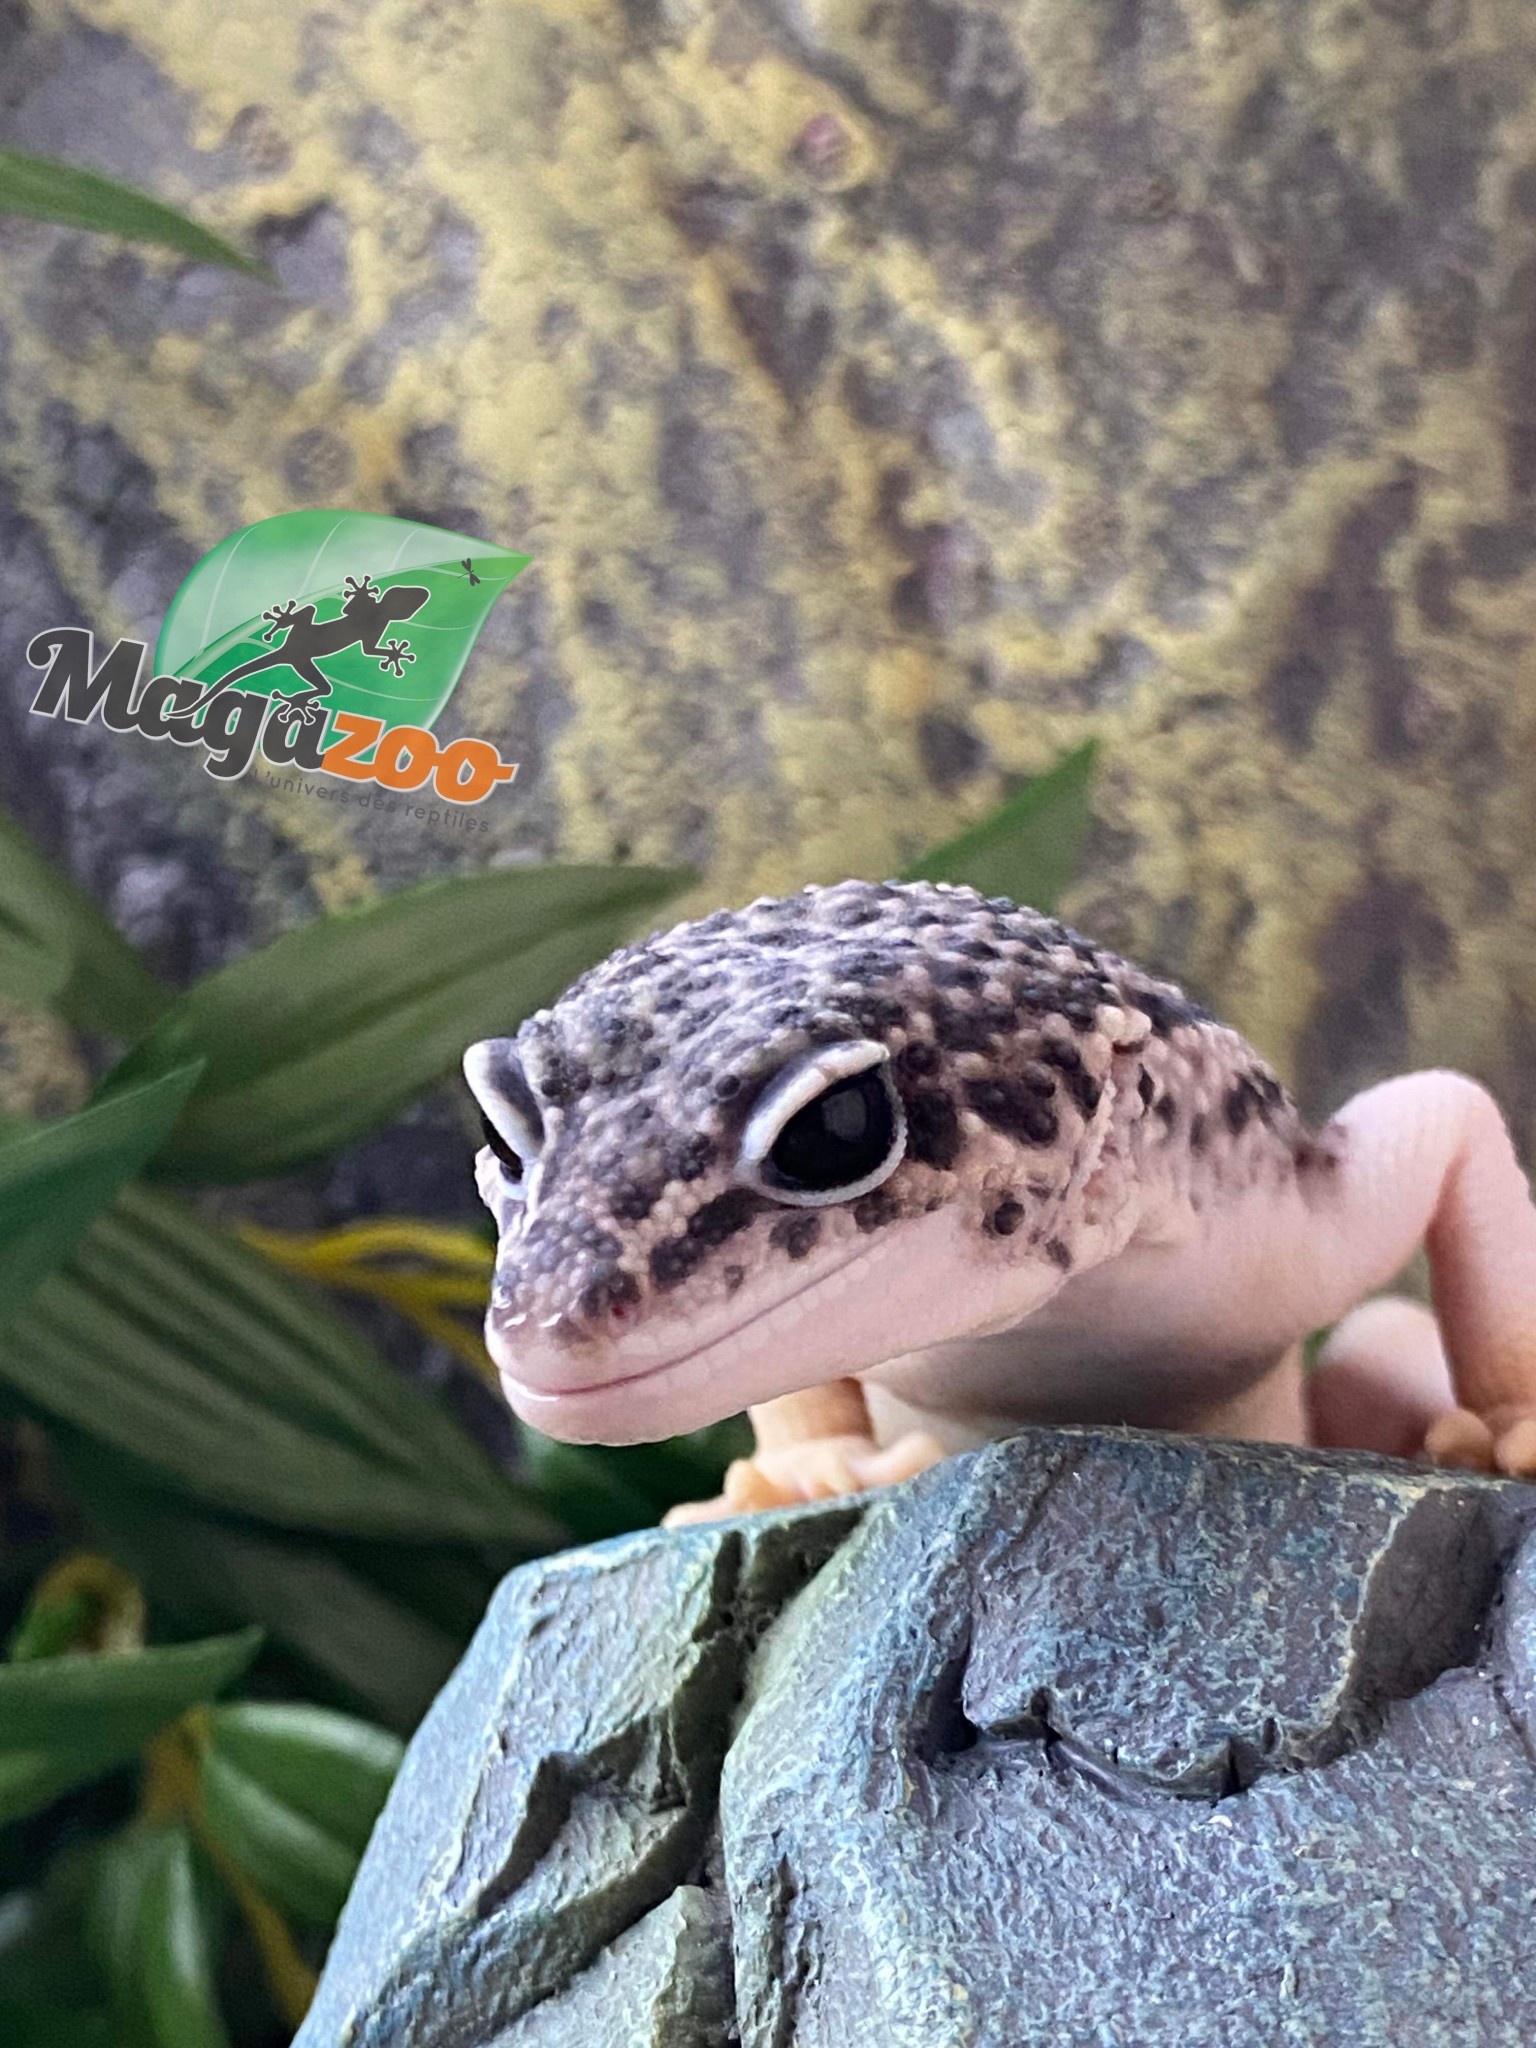 Magazoo Leopard gecko Blacknight total eclipse male 5/9/23 #34 (SPECIAL ORDER)